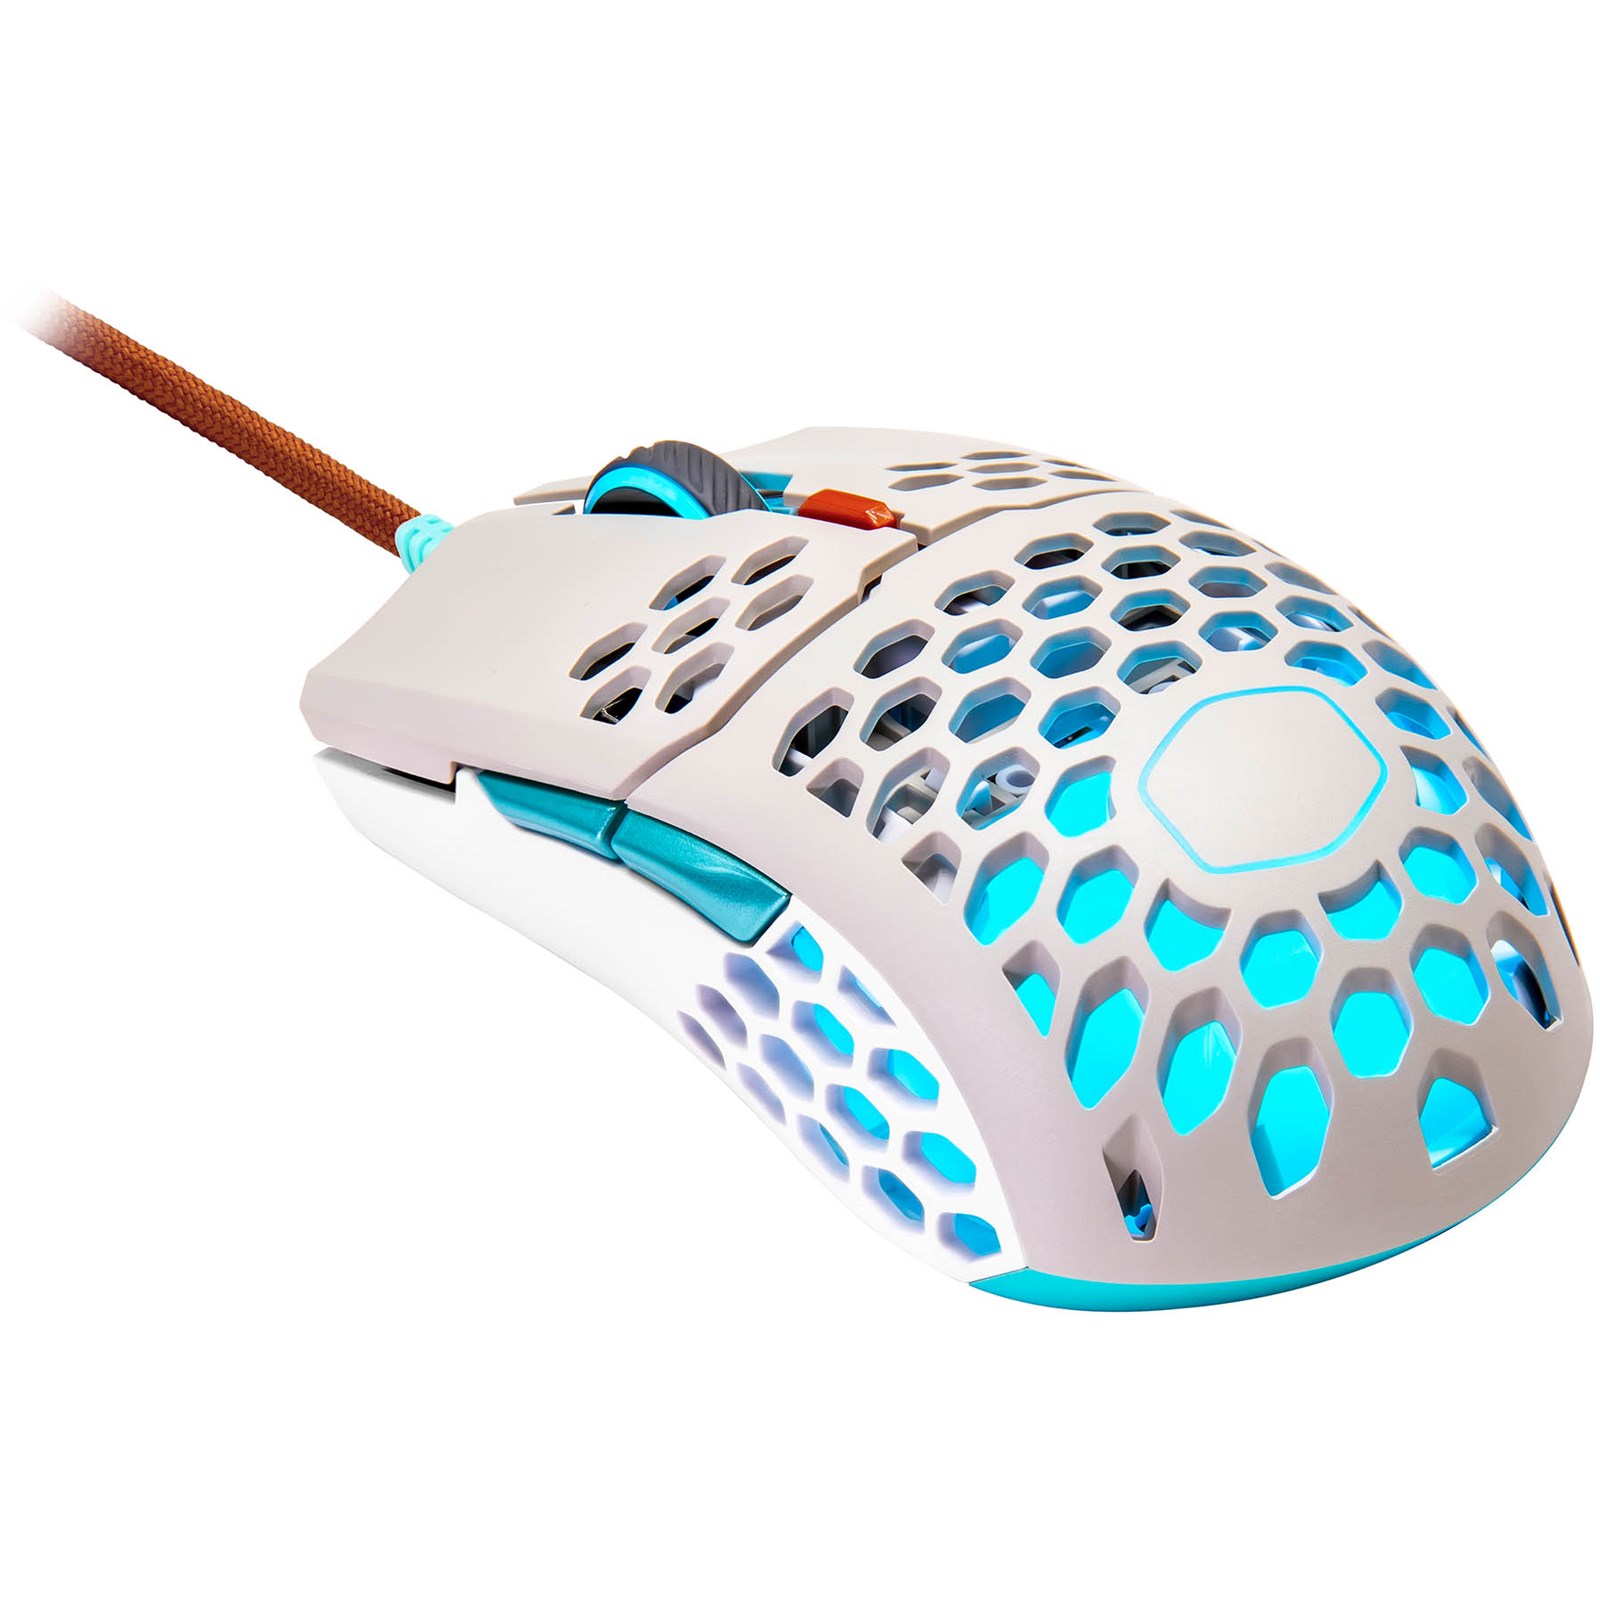 Cooler Master MM711 Retro Gaming Mouse